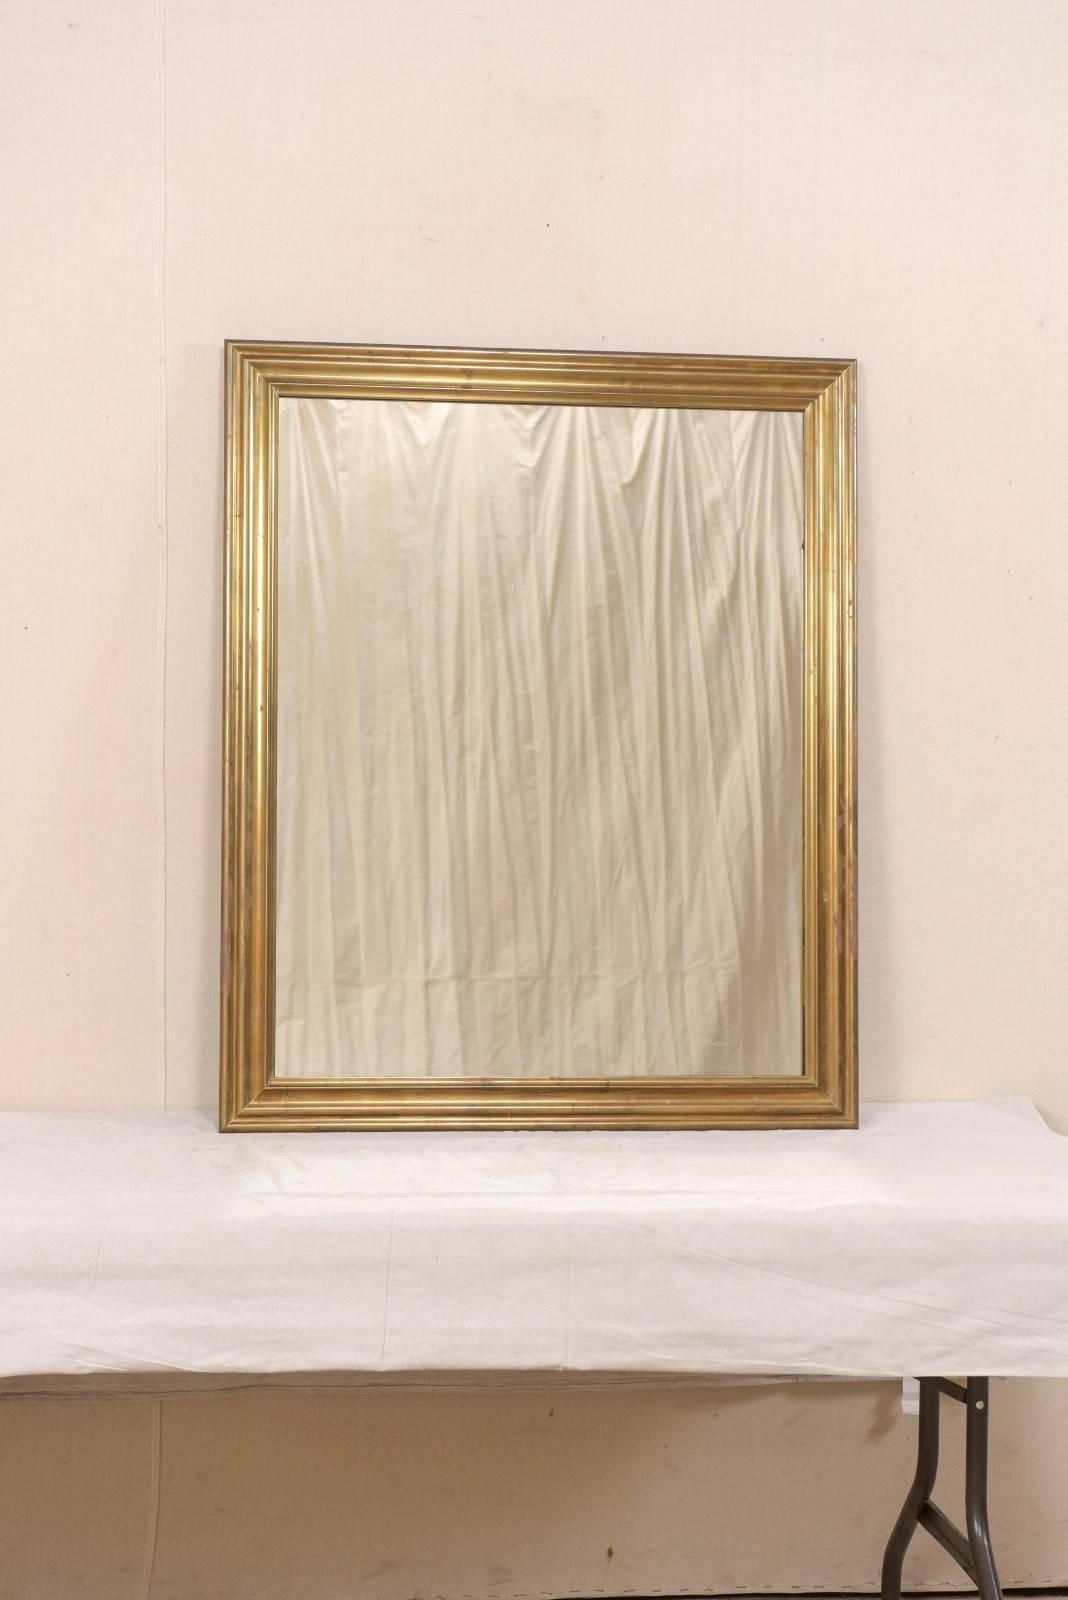 A French mirror with brass surround from the mid-20th century. This simple and elegant vintage French mirror features a rectangular shape with brass surround, which has a lovely patina throughout. This is a good sized mirror, standing at over 3.5 ft